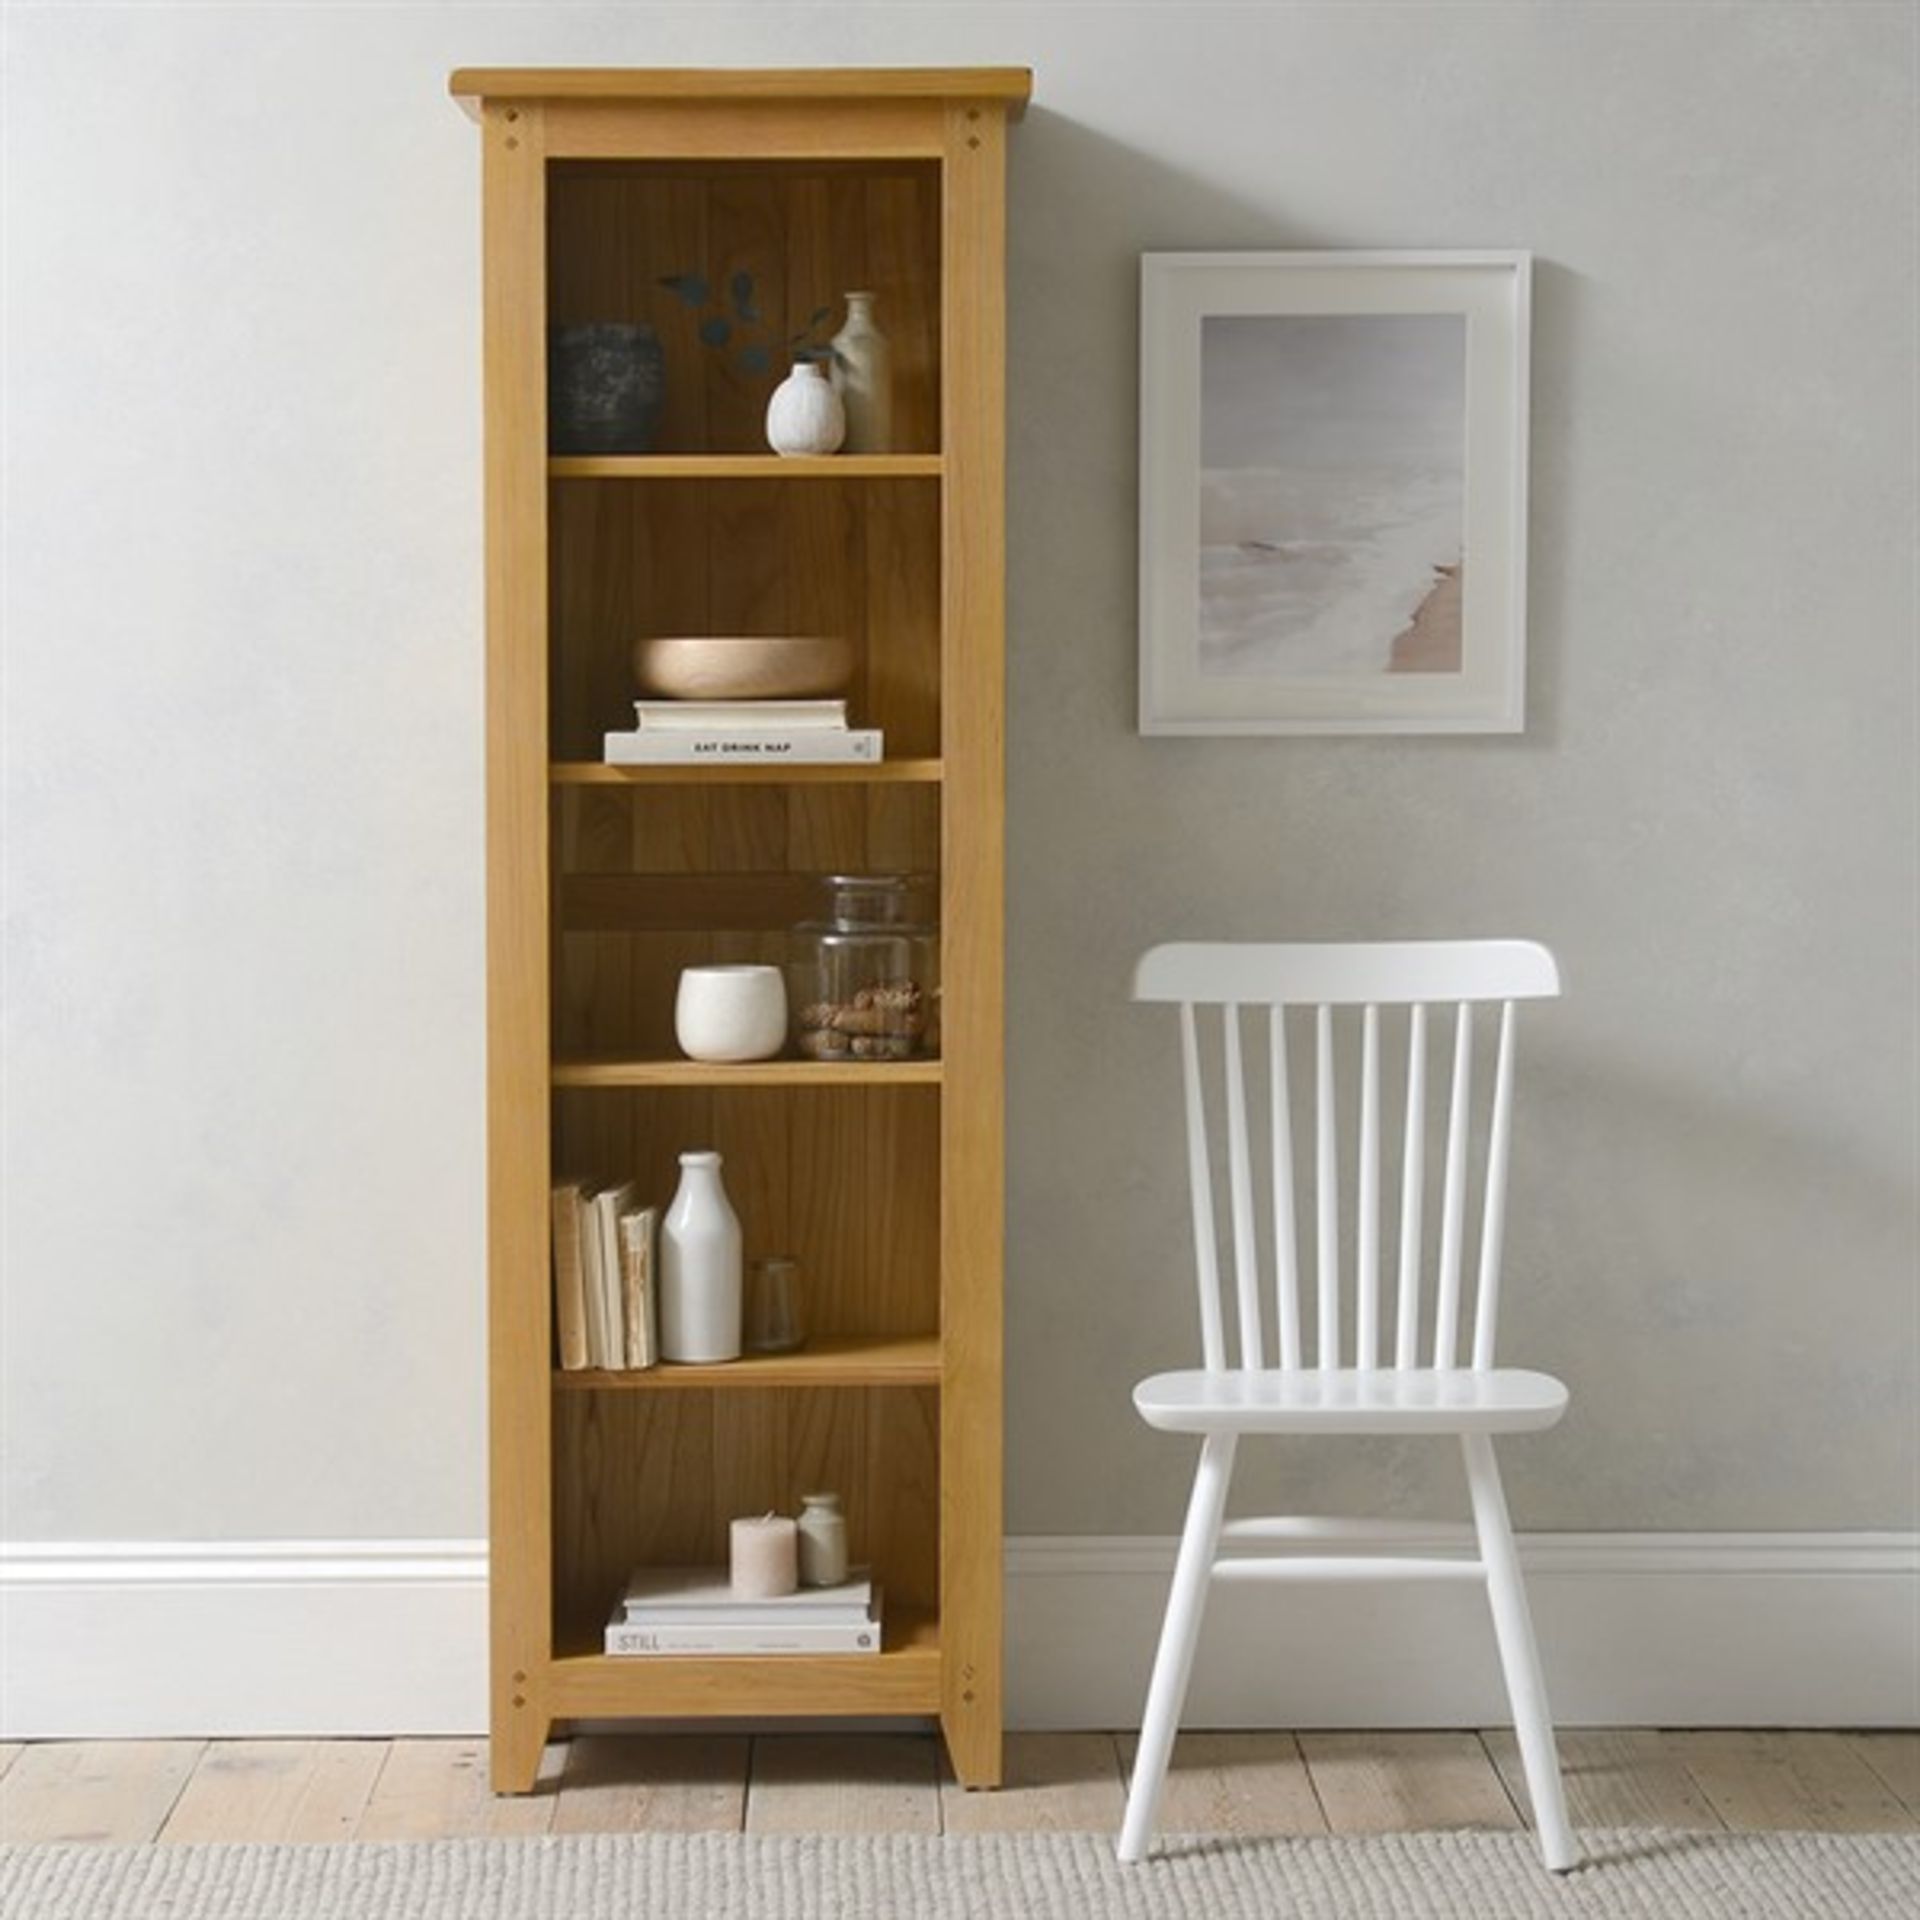 Cotswold Company Oakland Rustic Oak Tall Slim Bookcase RRP Â£349.00 - The items in this lot are